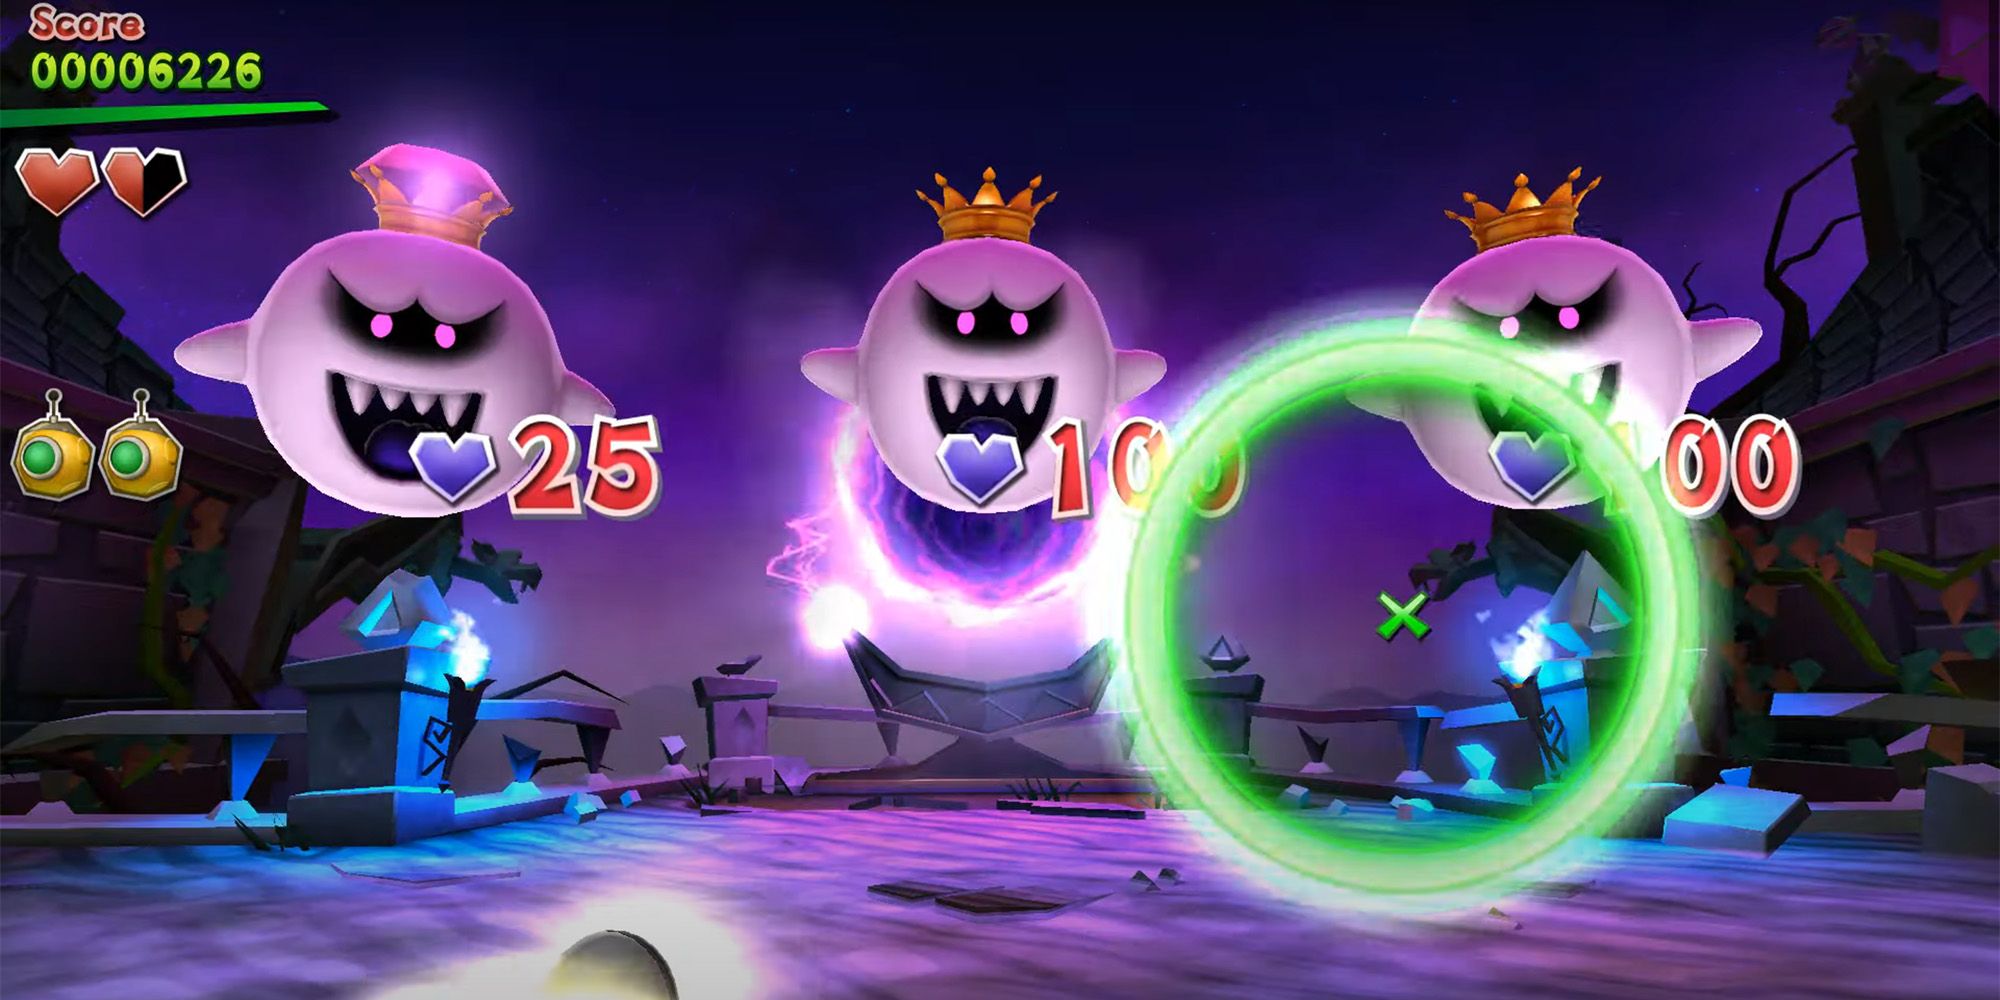 Luigi's Mansion Arcade - King Boo surrounded by two clones of himself